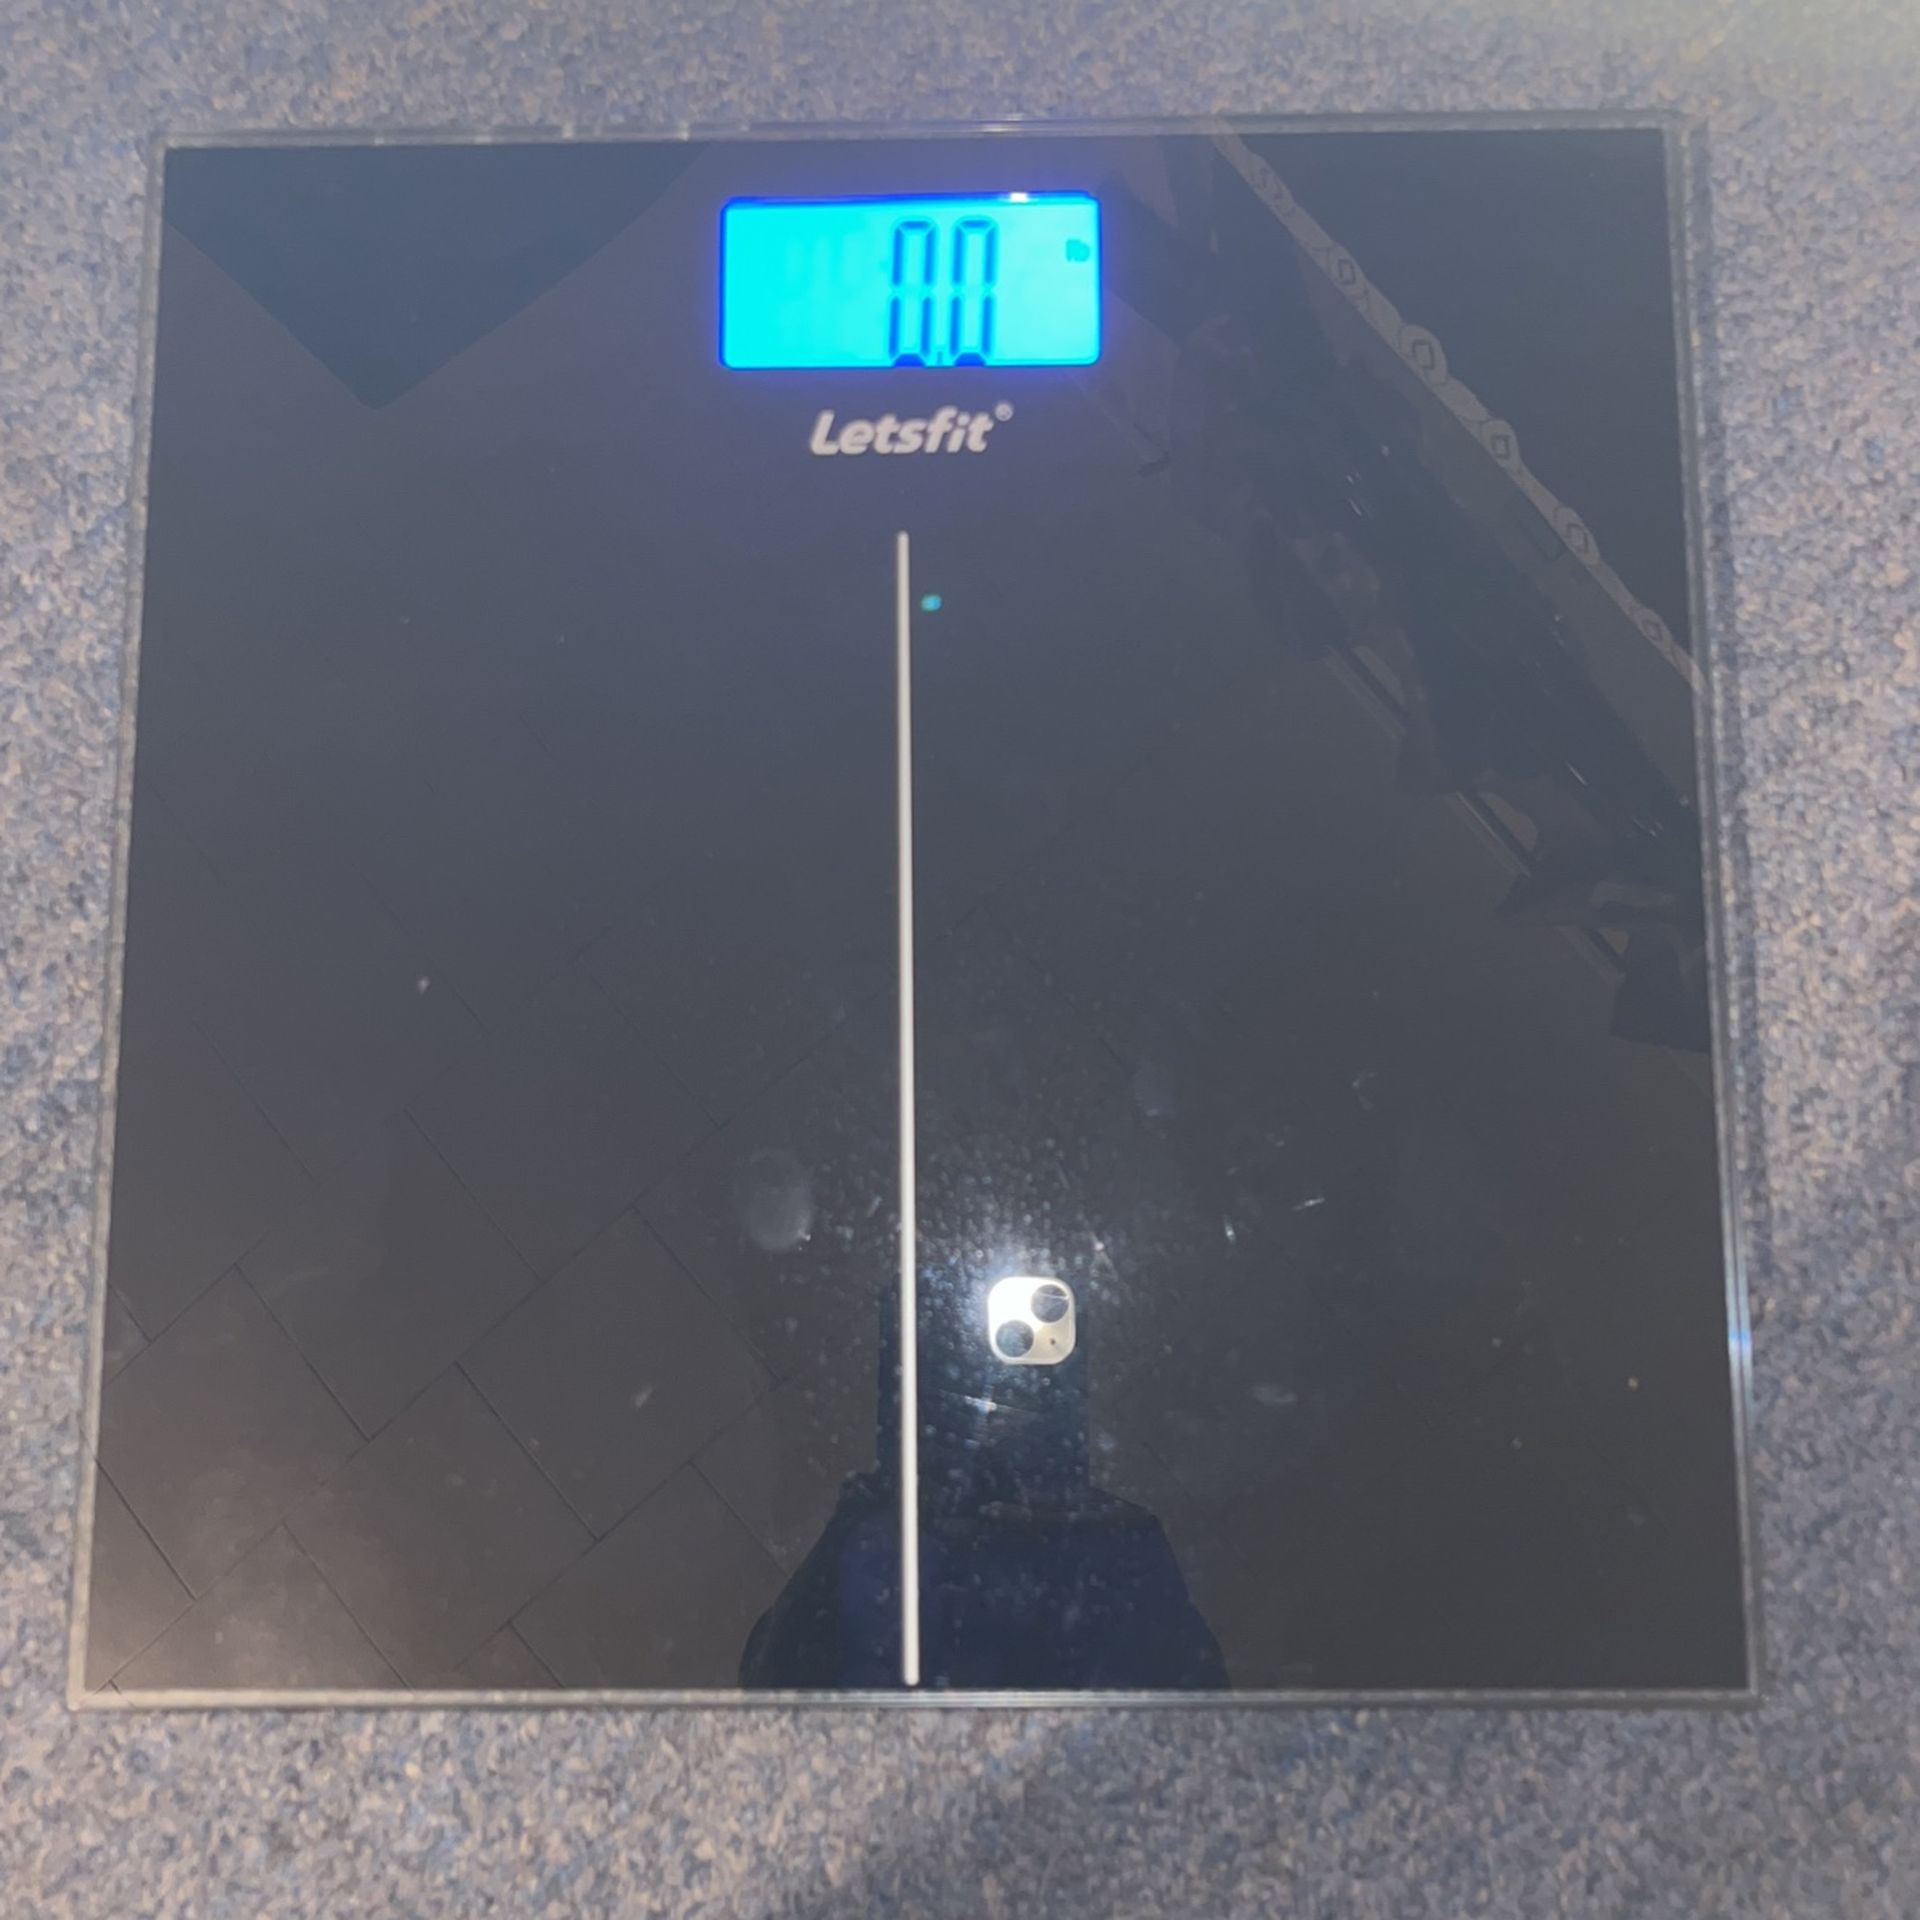 Letsfit Digital Body Weight Scale Bathroom Scale Large Backlit Display EB5636H